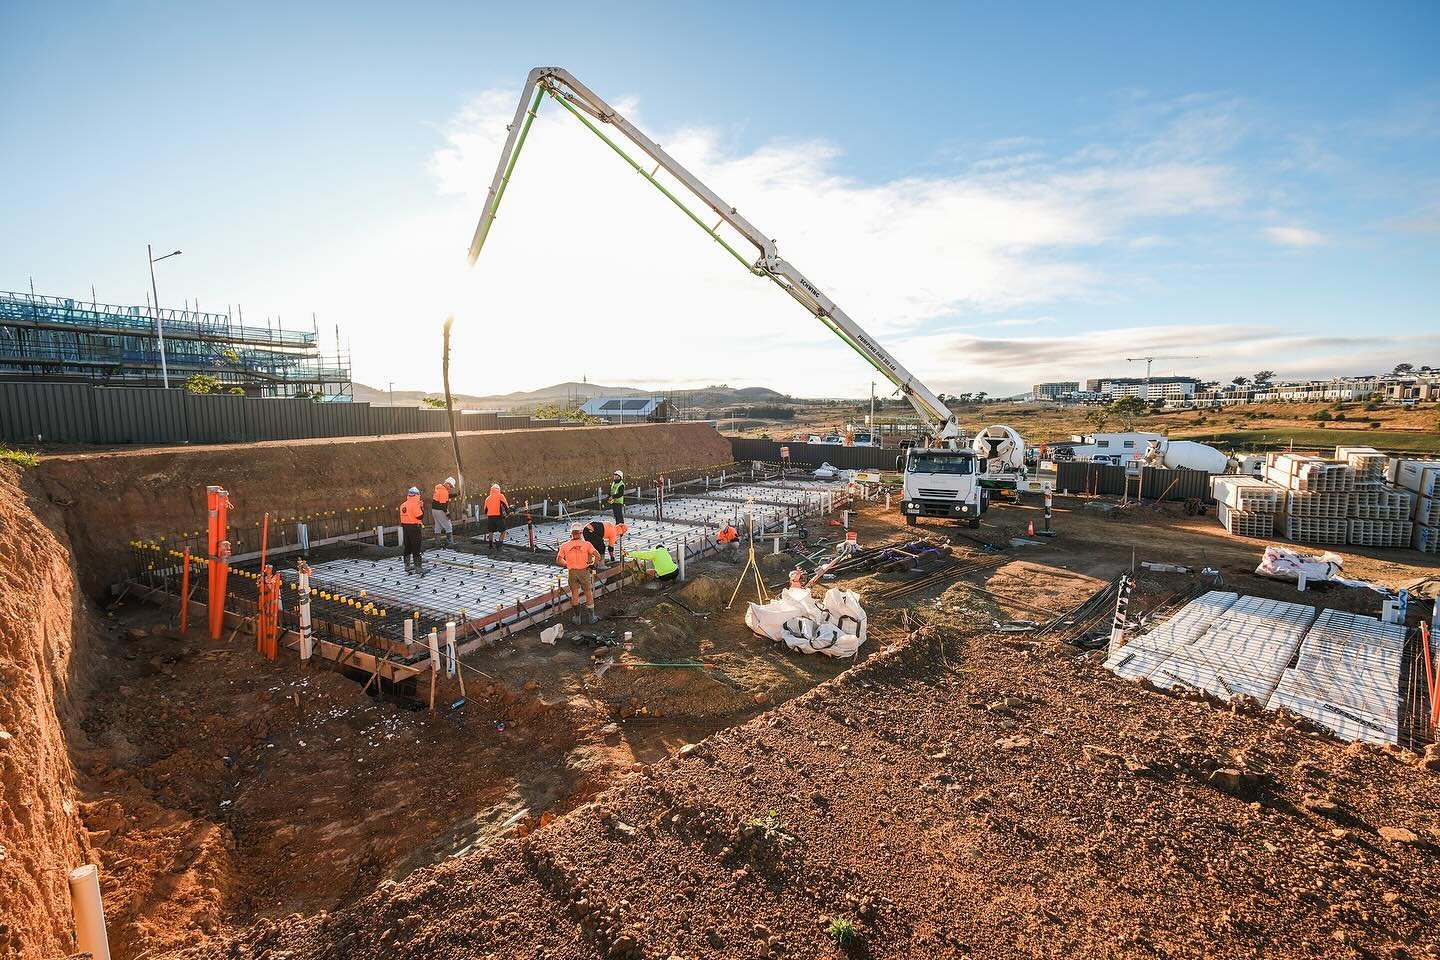 Construction at @brontegroup_&rsquo;s Solai in Denman Prospect is cracking on! 💥

Foundation works are now nearing completion with the first slabs poured this week ready for framework to begin soon. 

✅ Excavation and foundation works
✅ Slab prepara